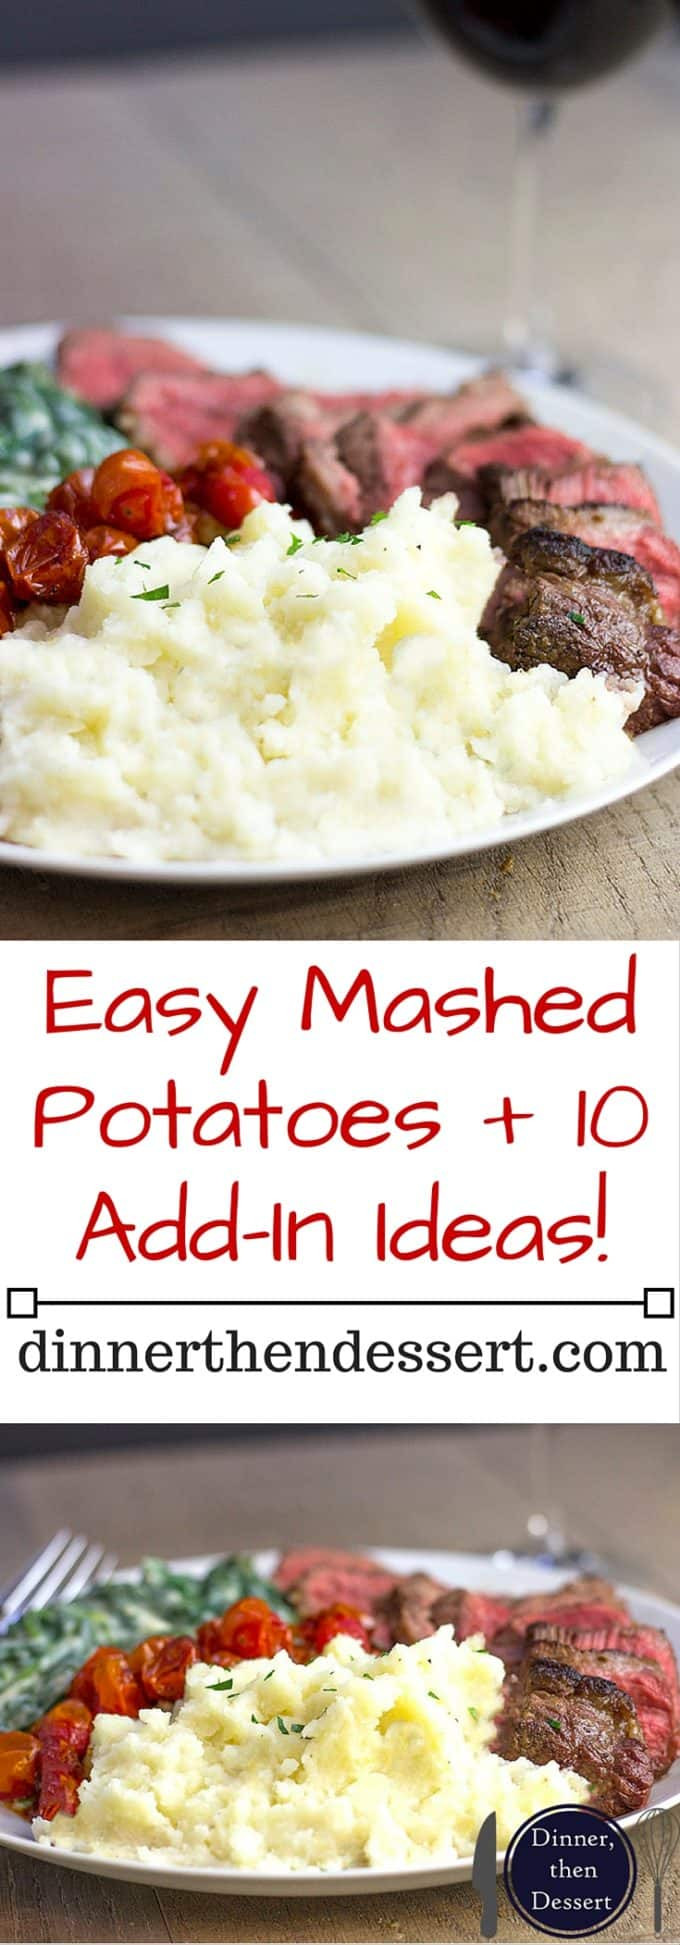 Mashed Potatoes Recipes Easy
 Easy Mashed Potatoes 10 Add In Ideas L Dinner then